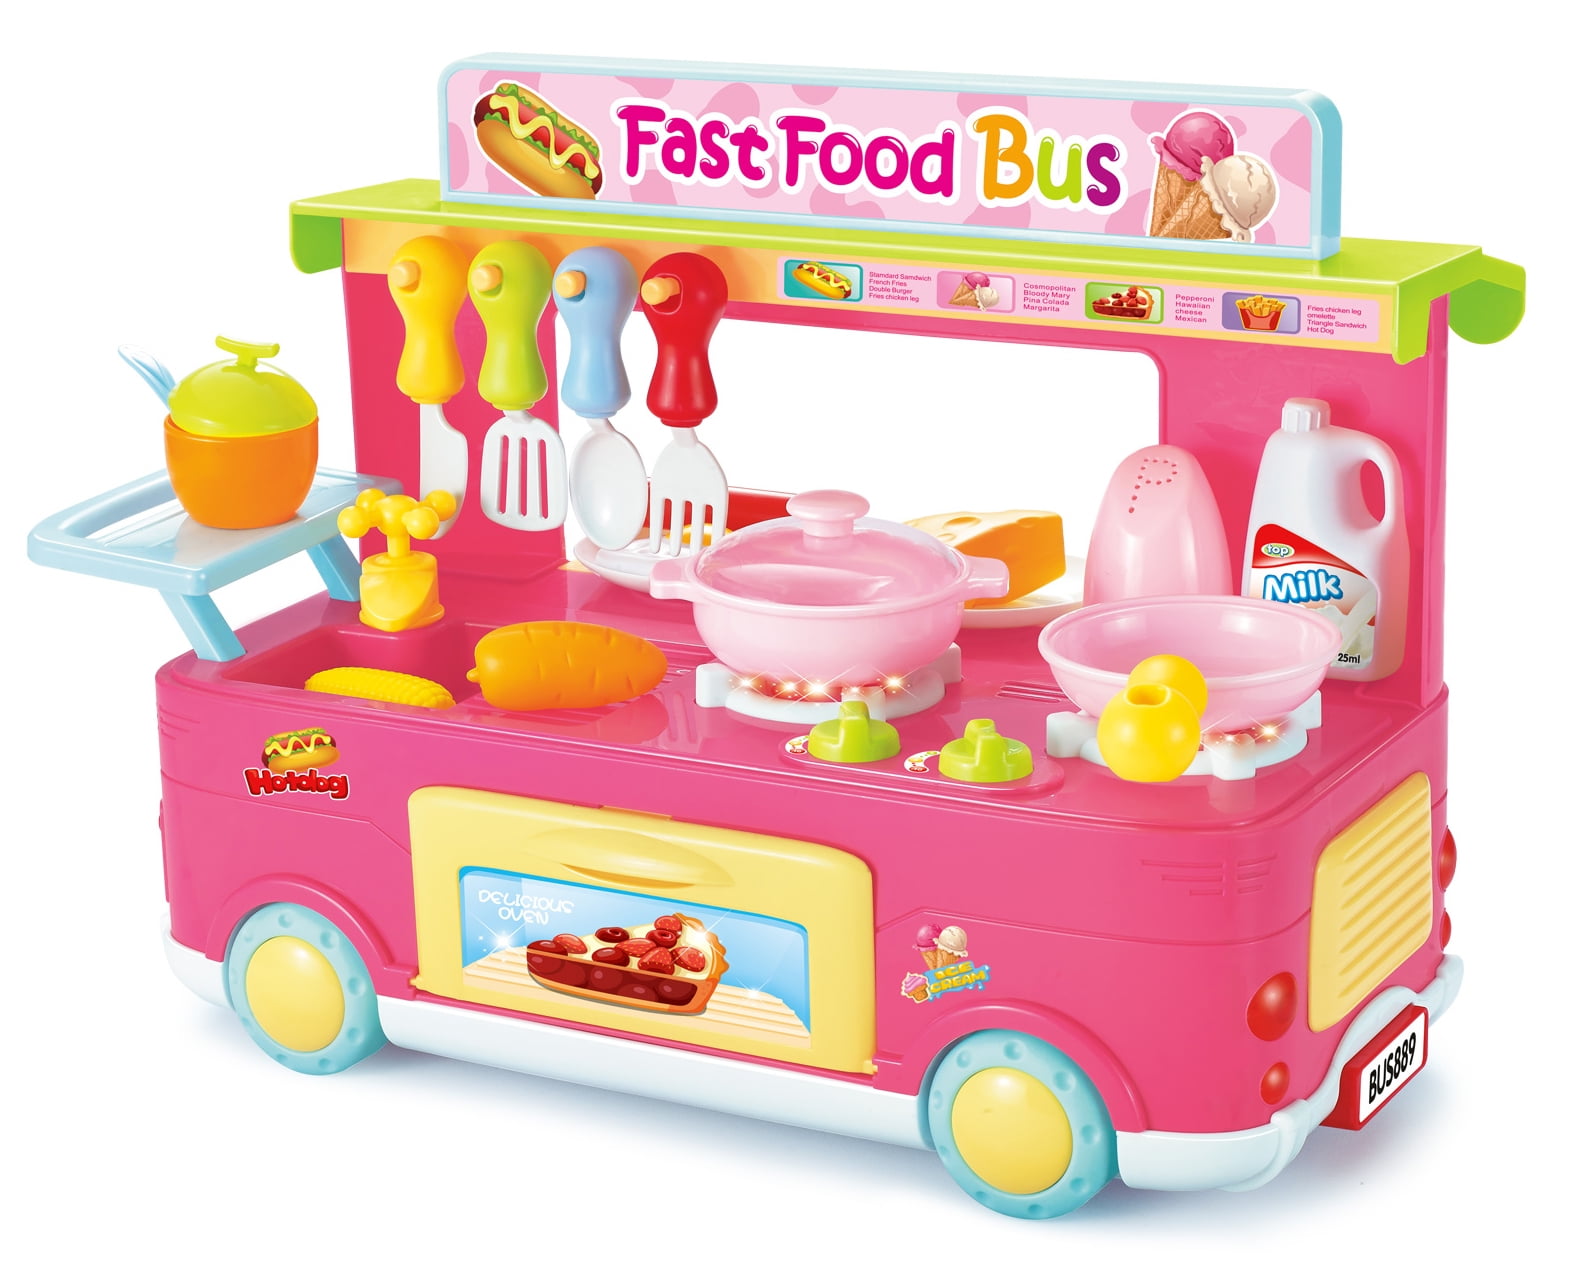 29Pcs Children's Campus Fast Food Bus Cooking Pretend Role-playing Toy Set H 